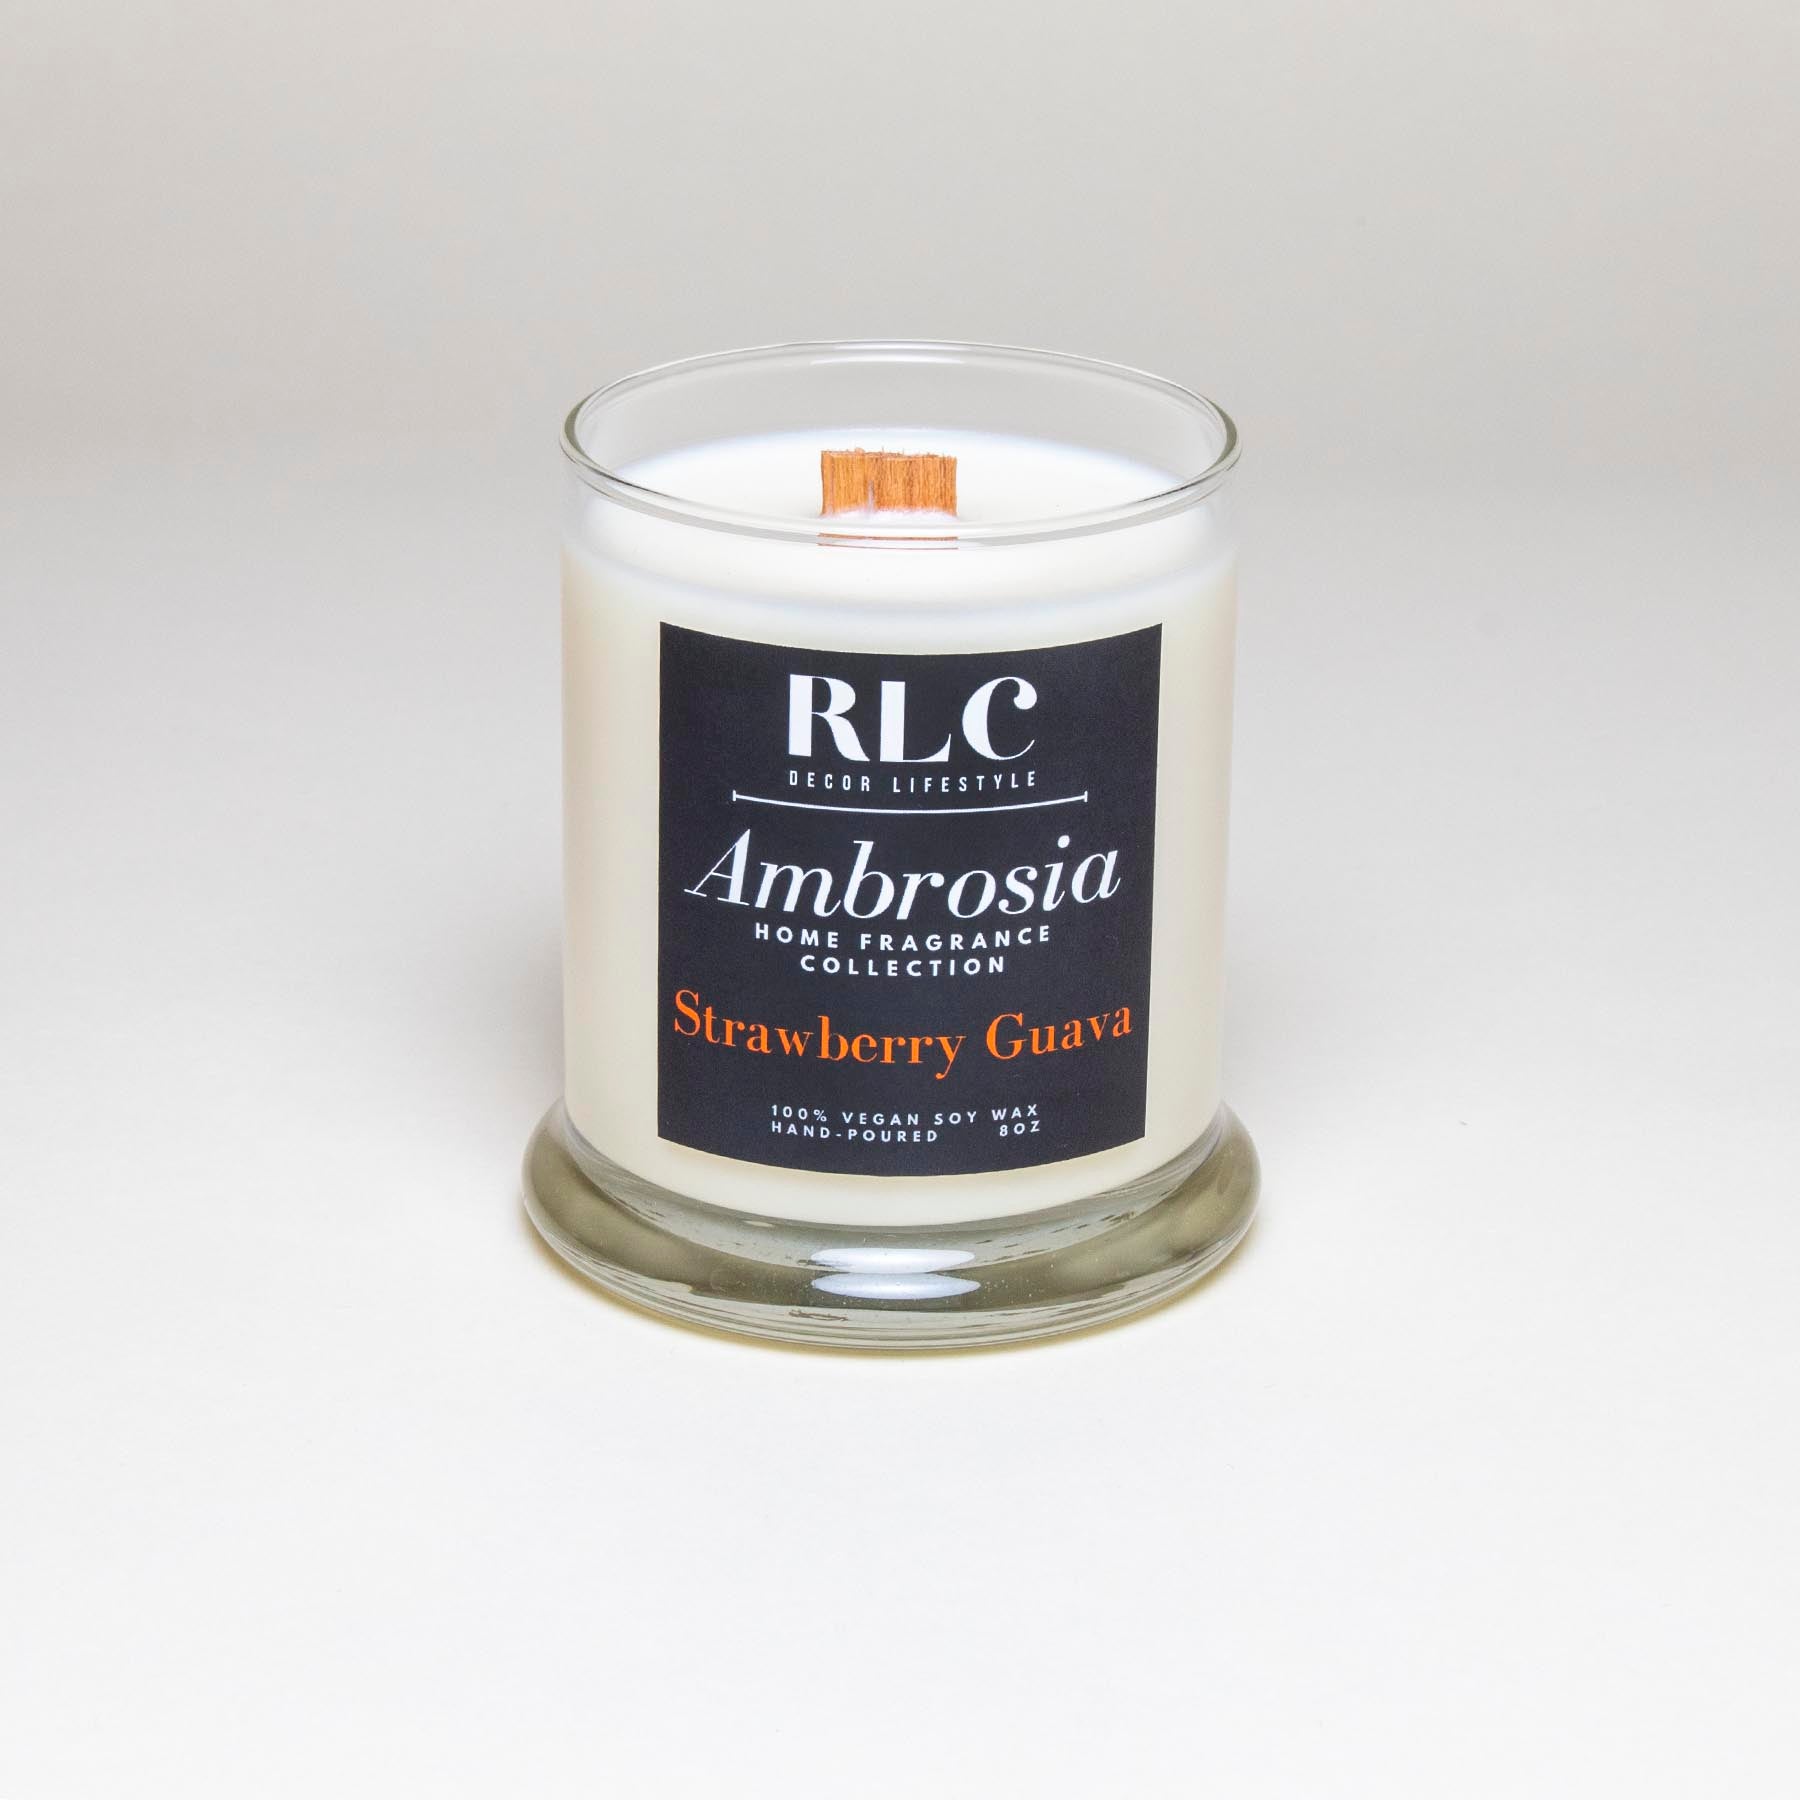 RLC Decor Lifestyle - ACambrosia Collection - Vegan Soy Strawberry Guava Candle - A Chicago-based lifestyle brand. We provide 100% Handpoured Vegan Soy Candles for home & small office, travel candles, home decor, and jewelry. 